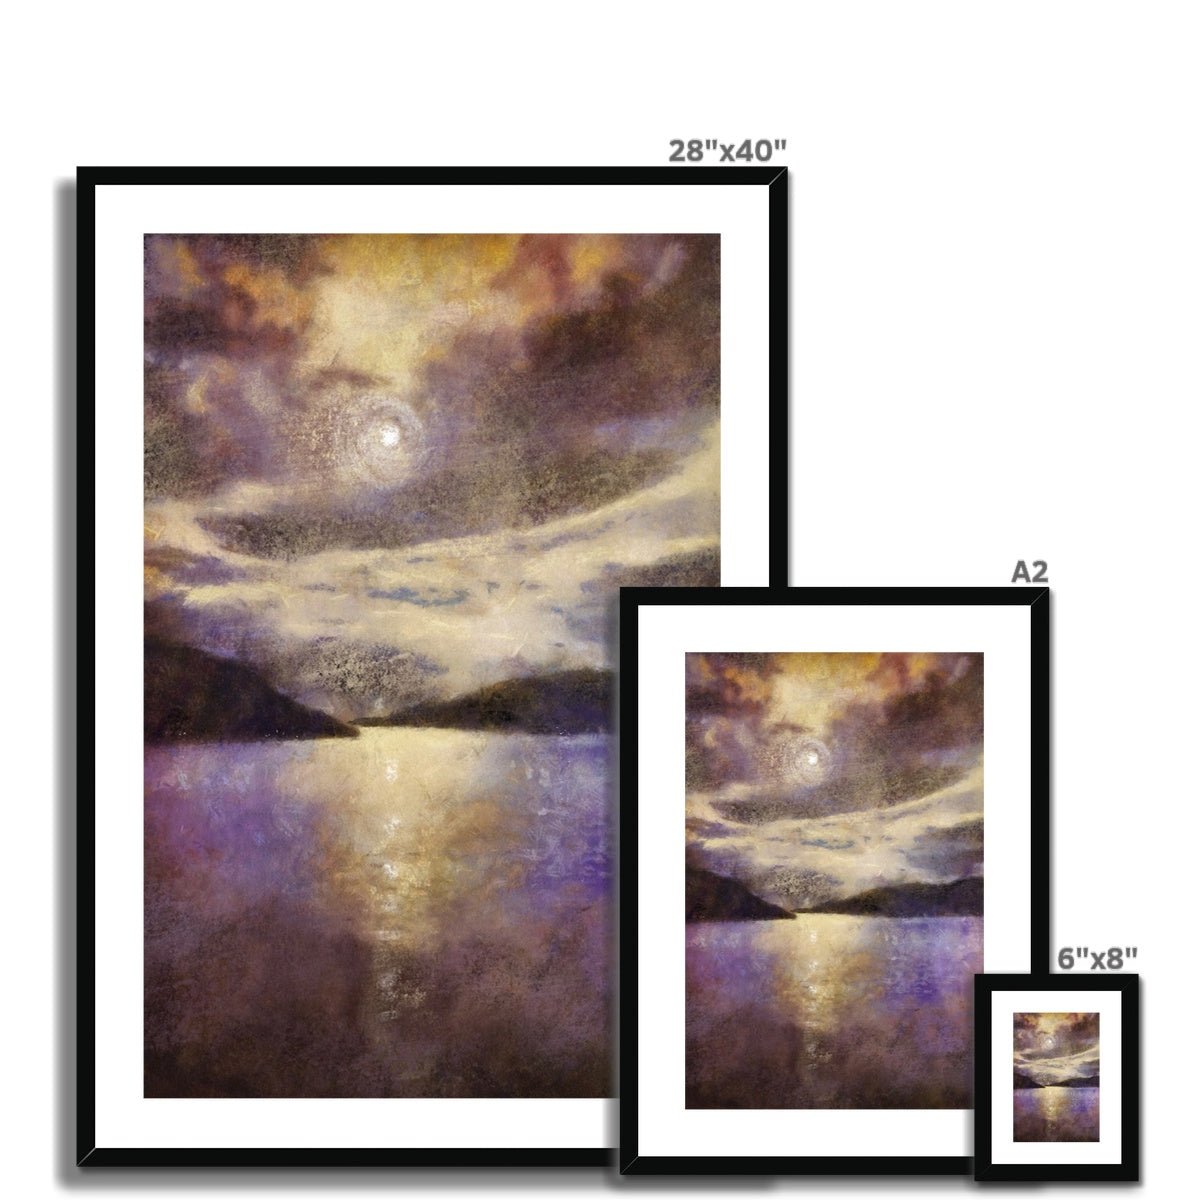 Moonlight Meets Lewis & Harris Painting | Framed & Mounted Prints From Scotland-Framed & Mounted Prints-Hebridean Islands Art Gallery-Paintings, Prints, Homeware, Art Gifts From Scotland By Scottish Artist Kevin Hunter